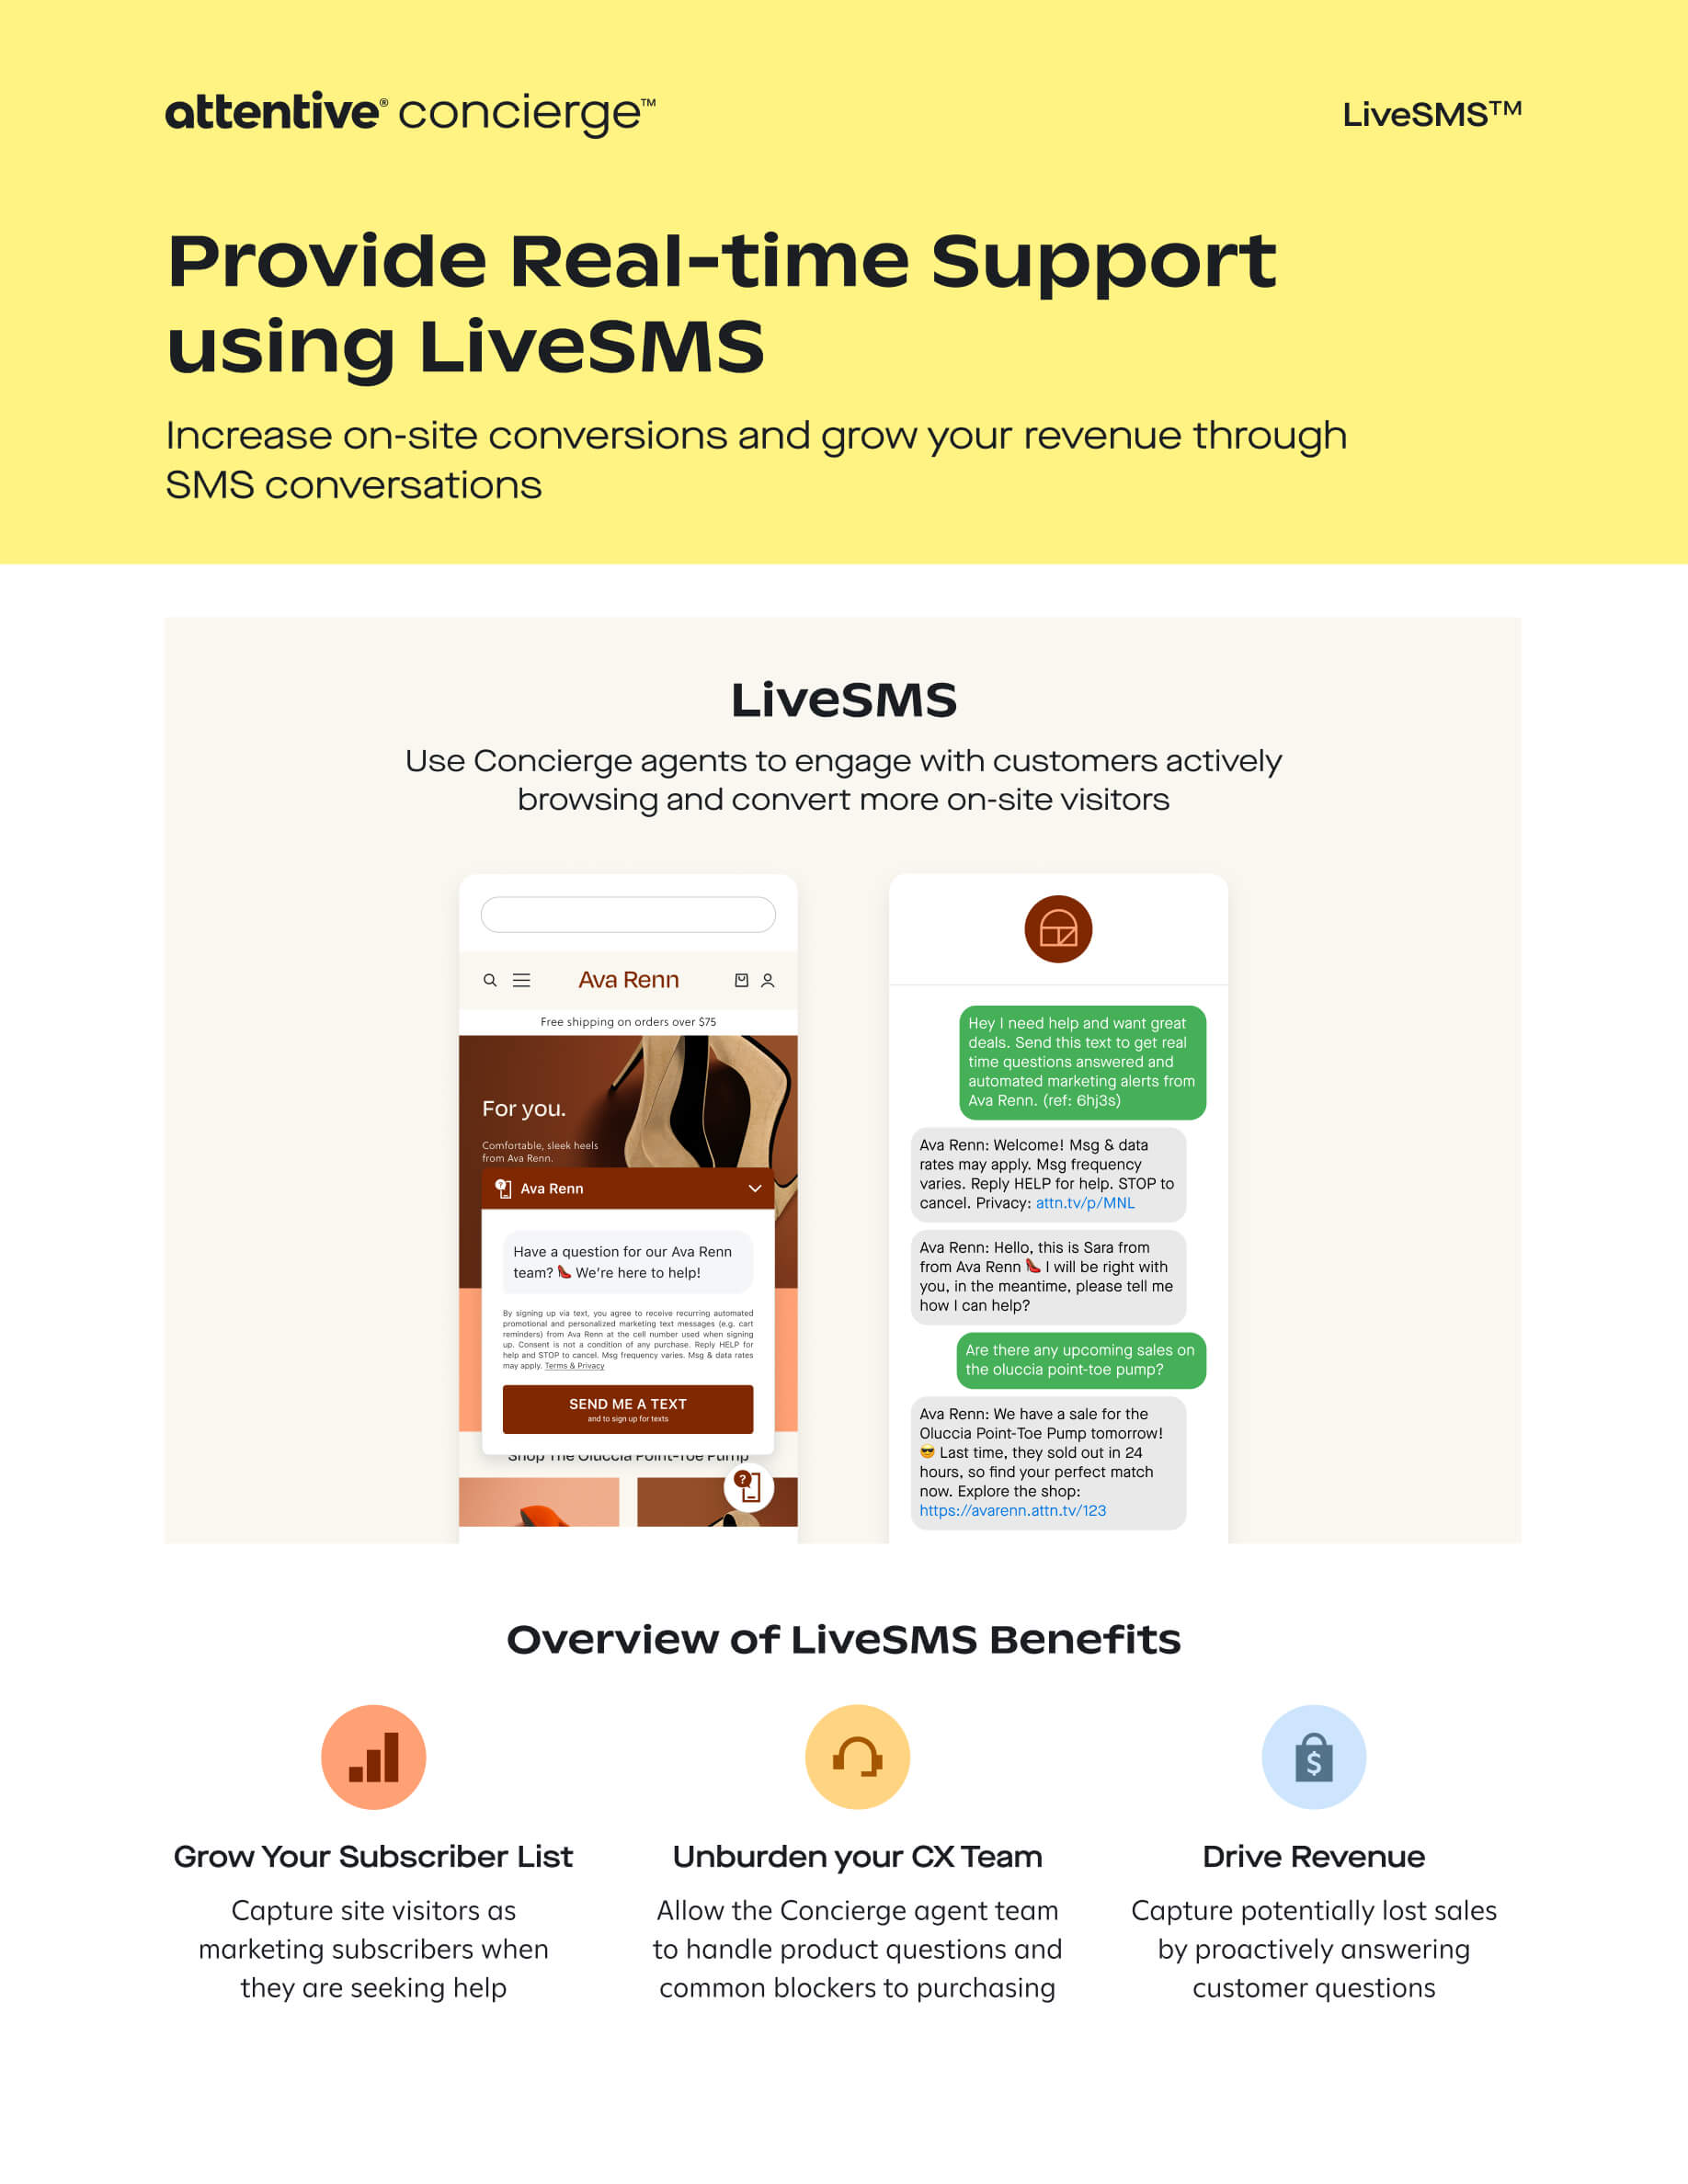 Page 1 of PDF about providing real-time support with LiveSMS.